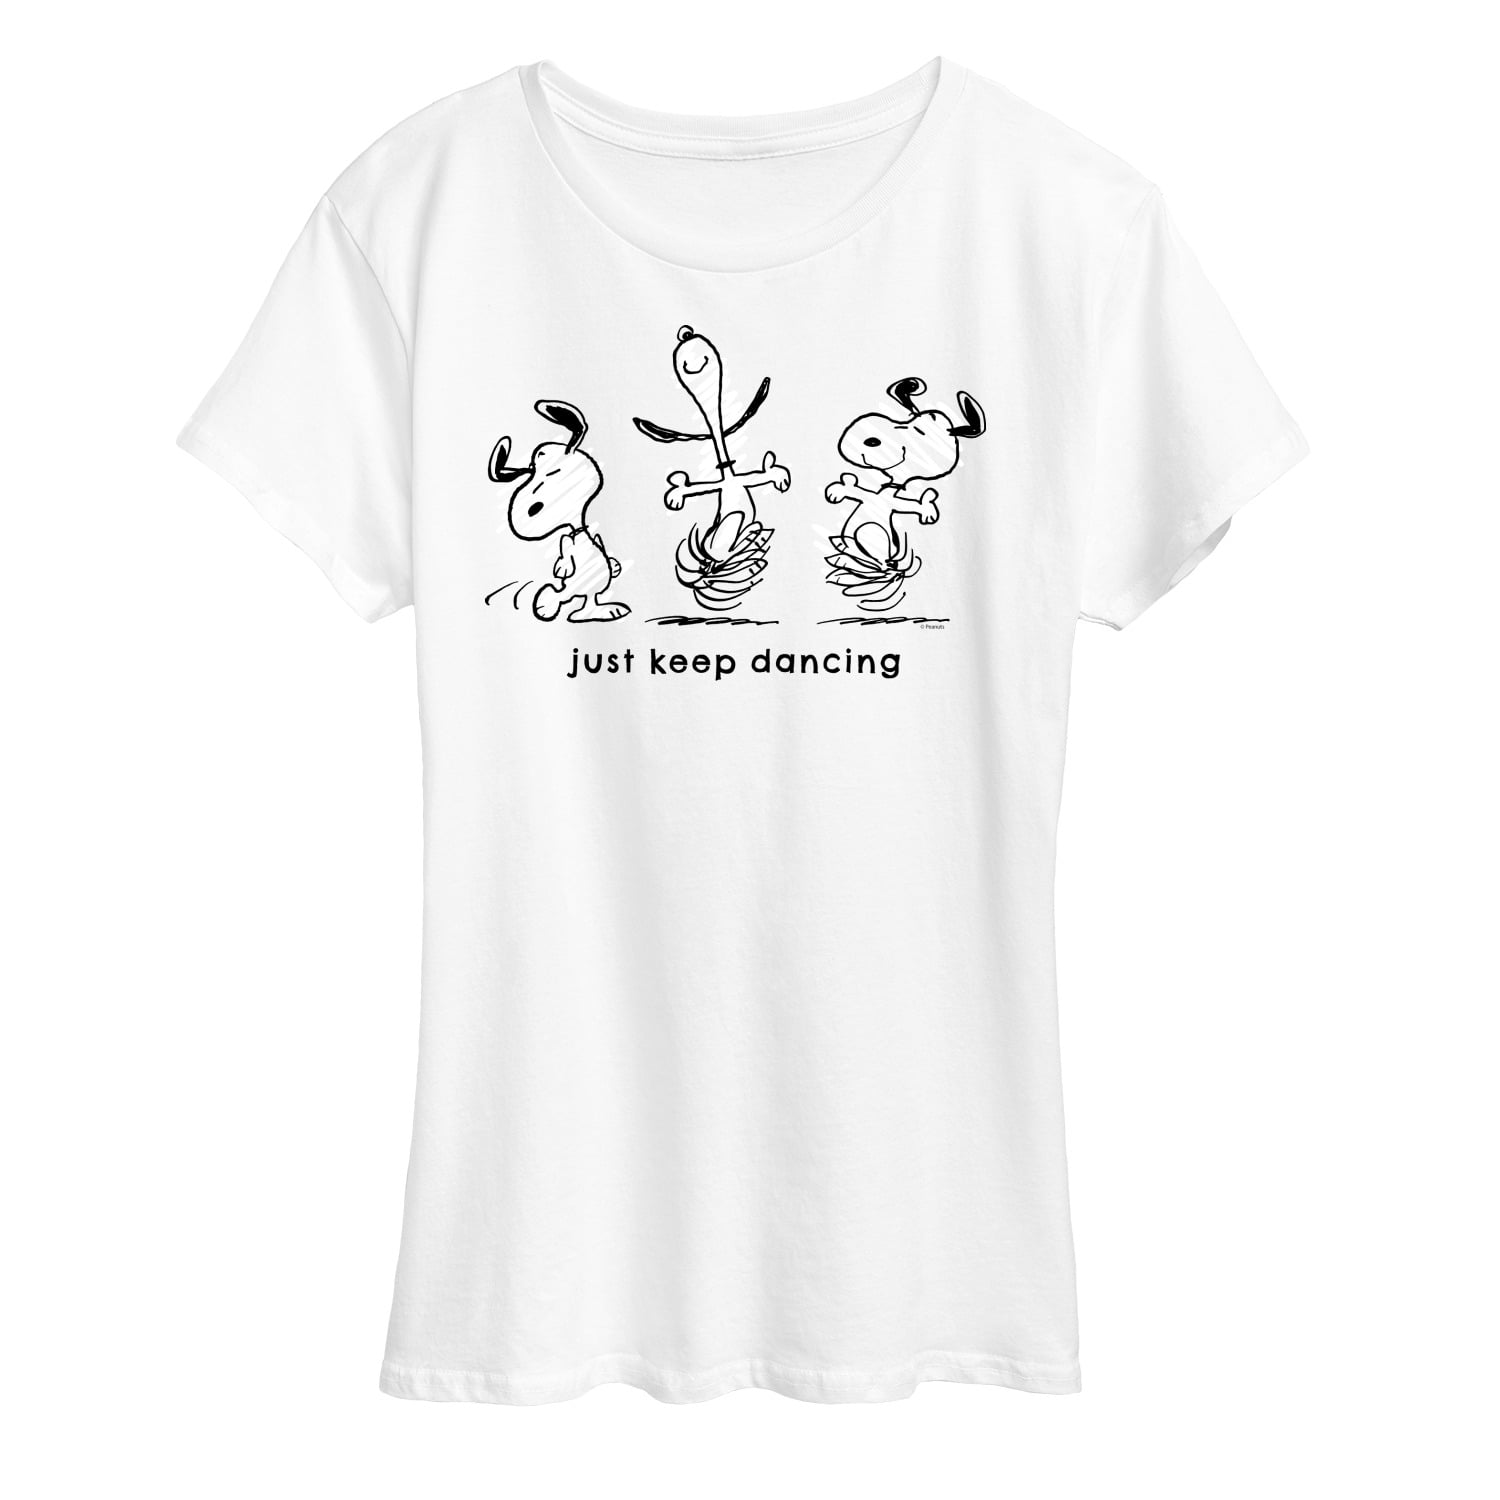 Peanuts - Snoopy Just Keep Dancing - Women's Short Sleeve Graphic T-Shirt